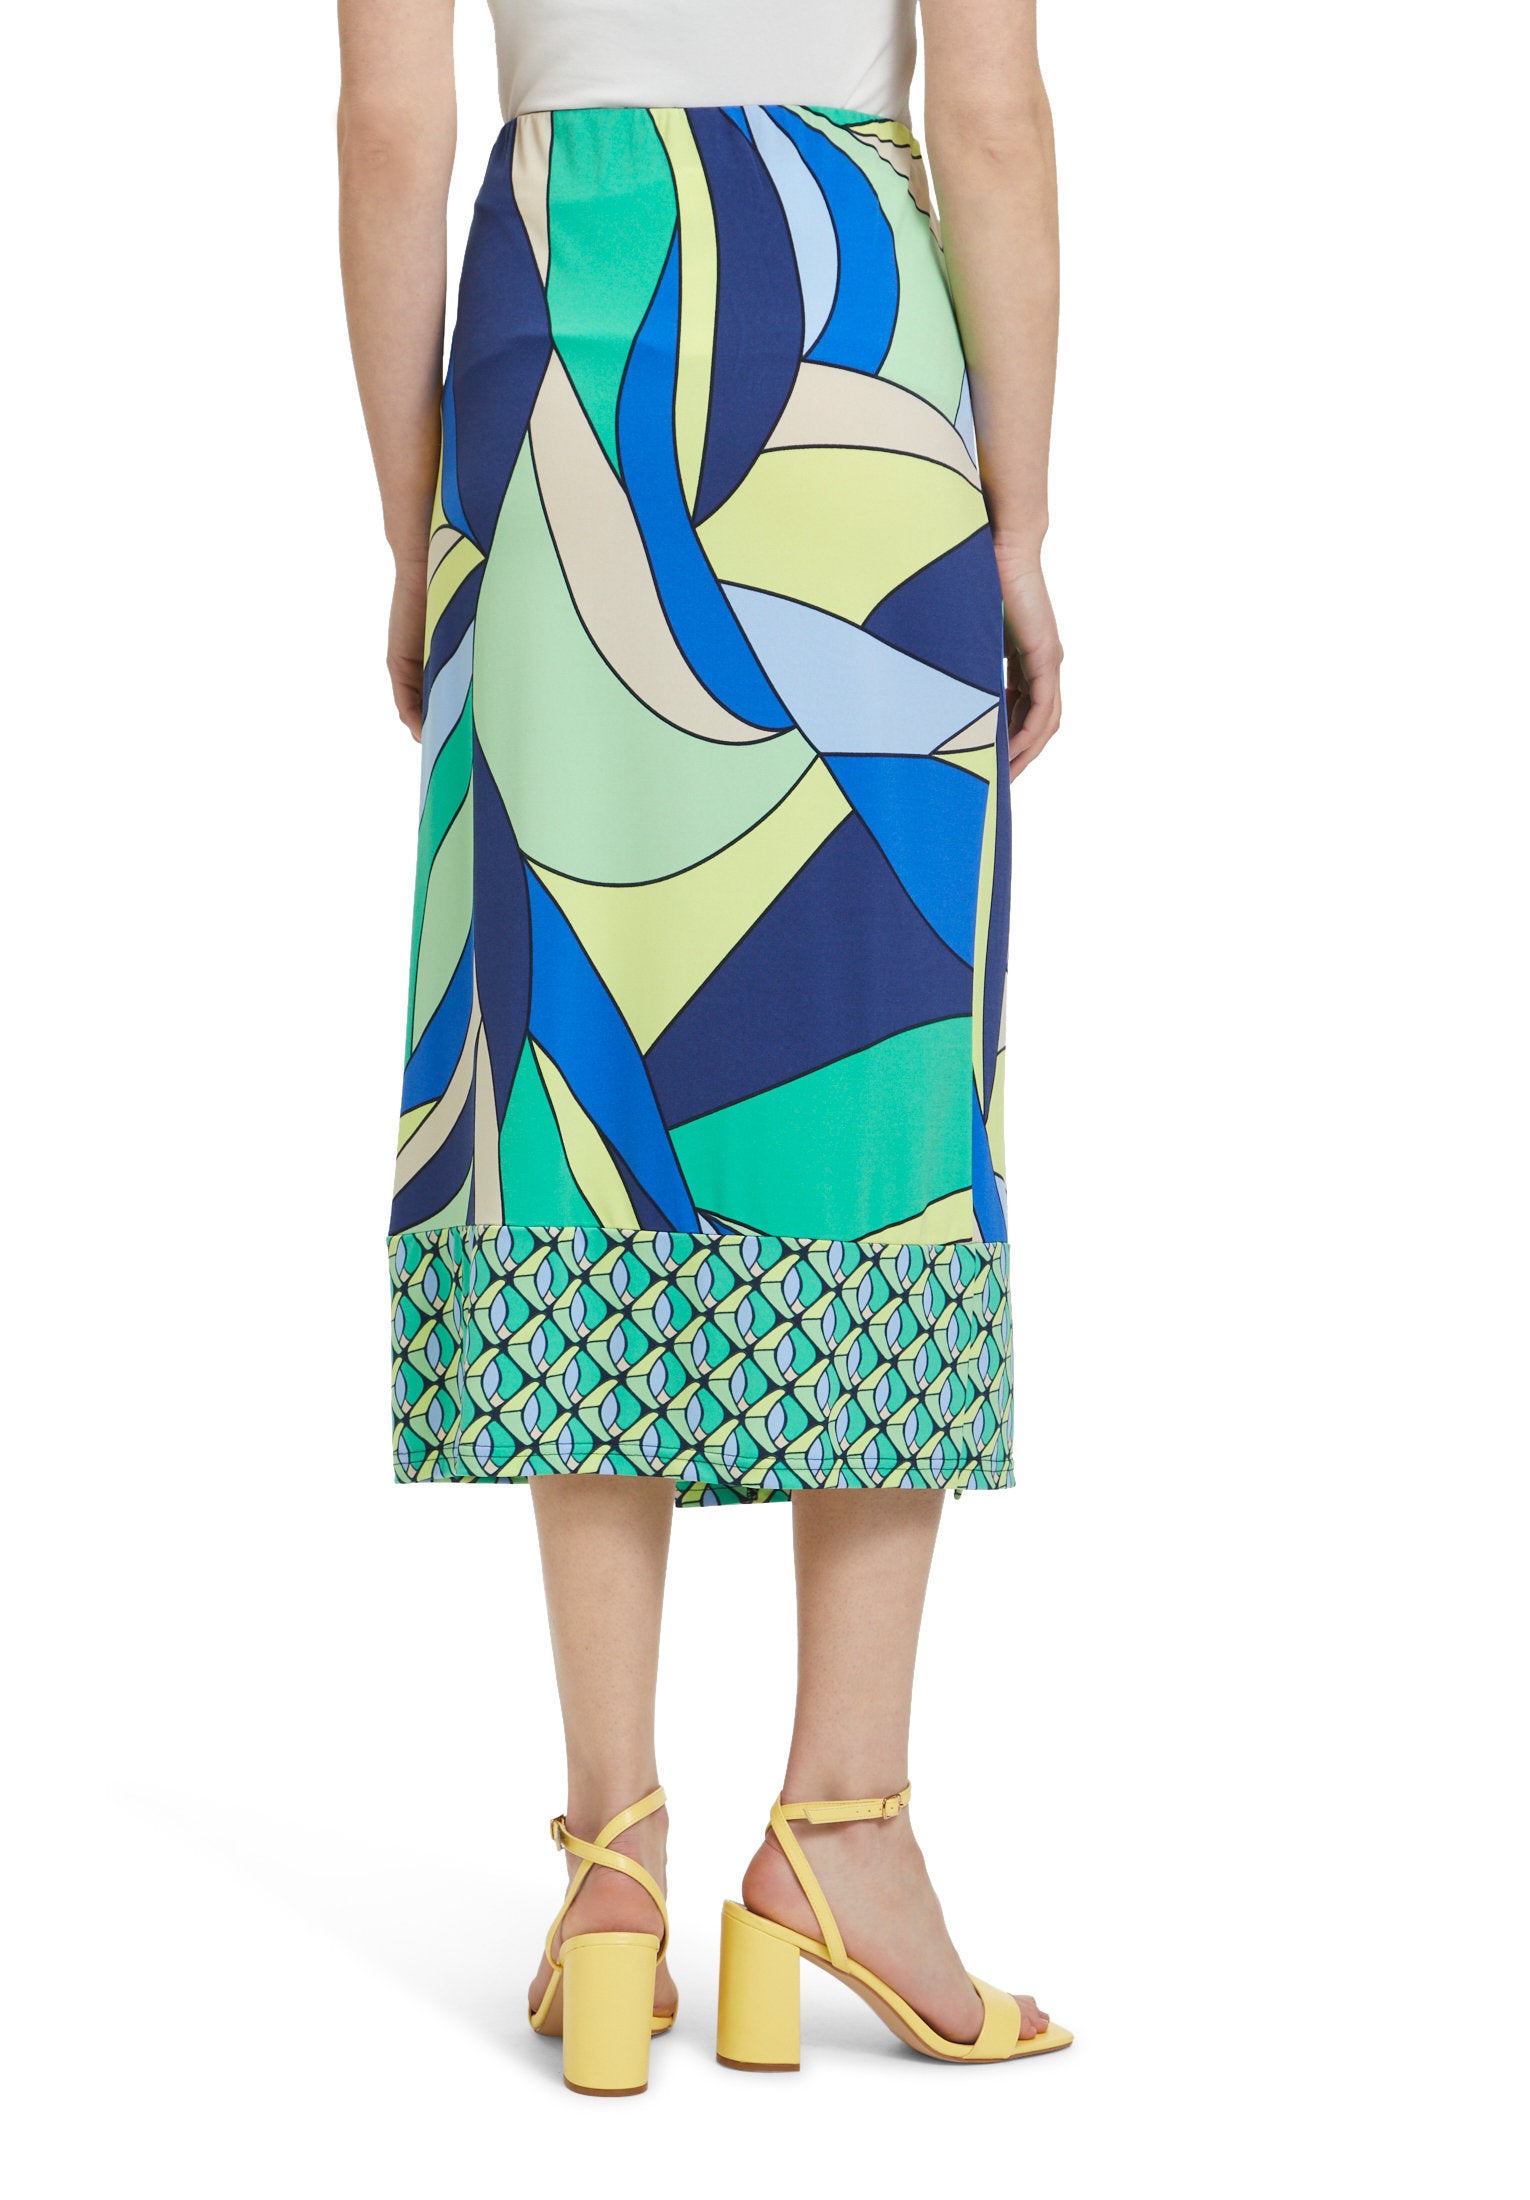 Midi Skirt With All Over Print_9355 2506_8850_04